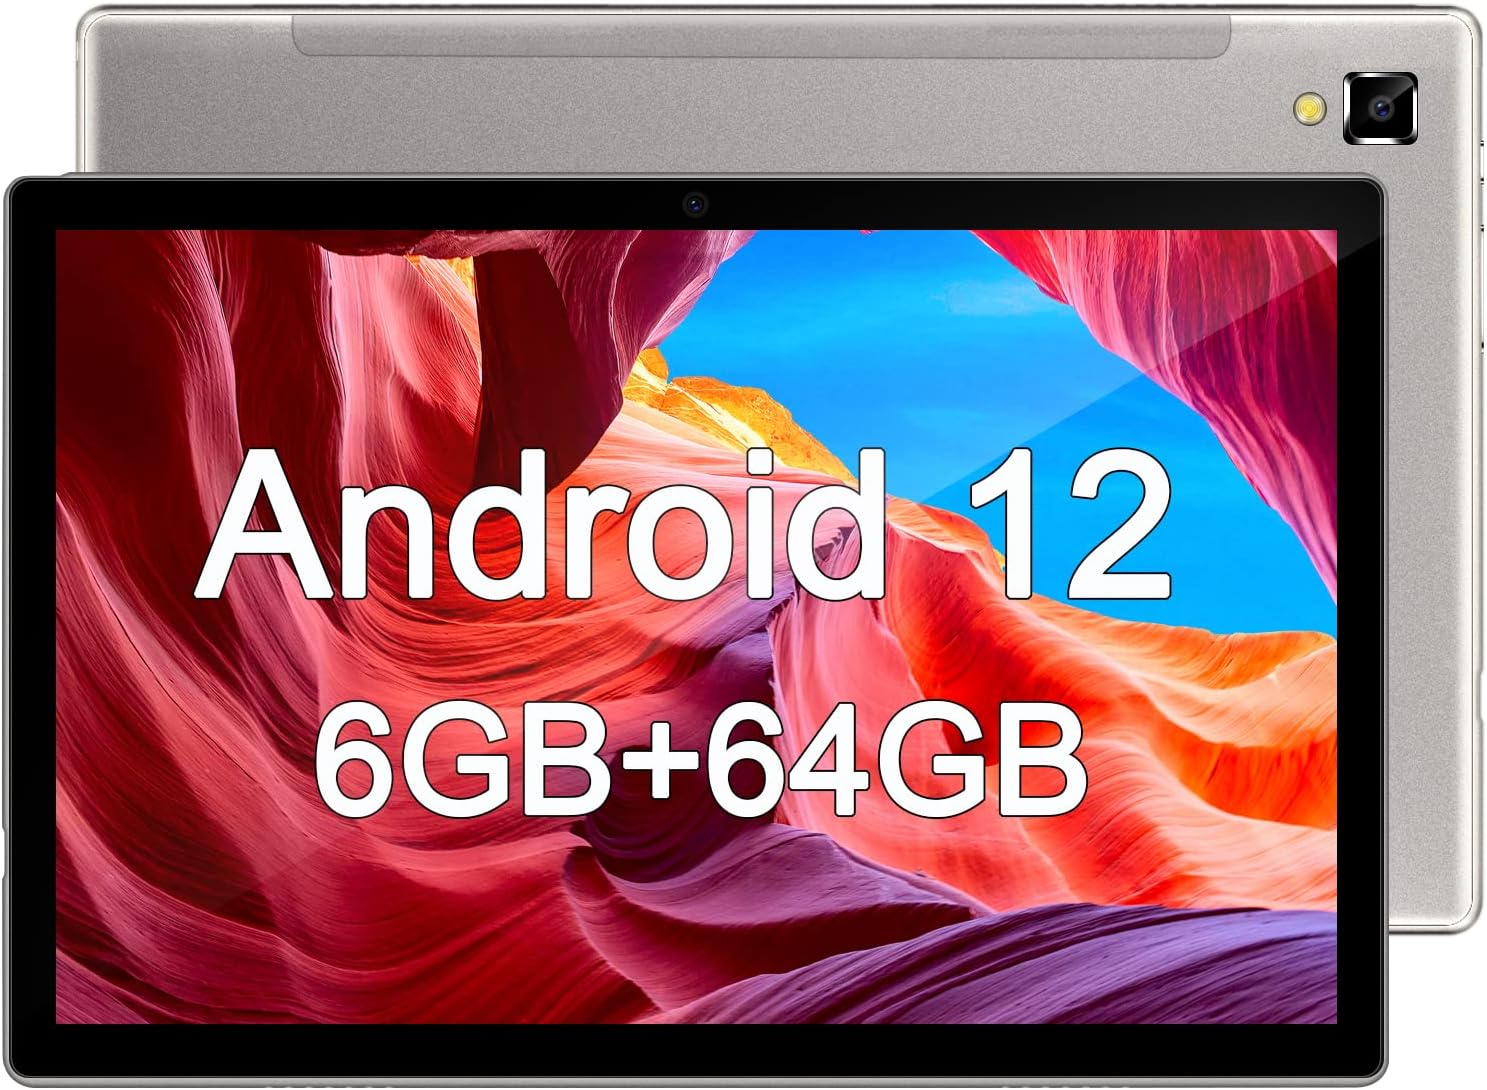 Android Tablet 10 inch, Android 12 Tablet, 6GB RAM [...]